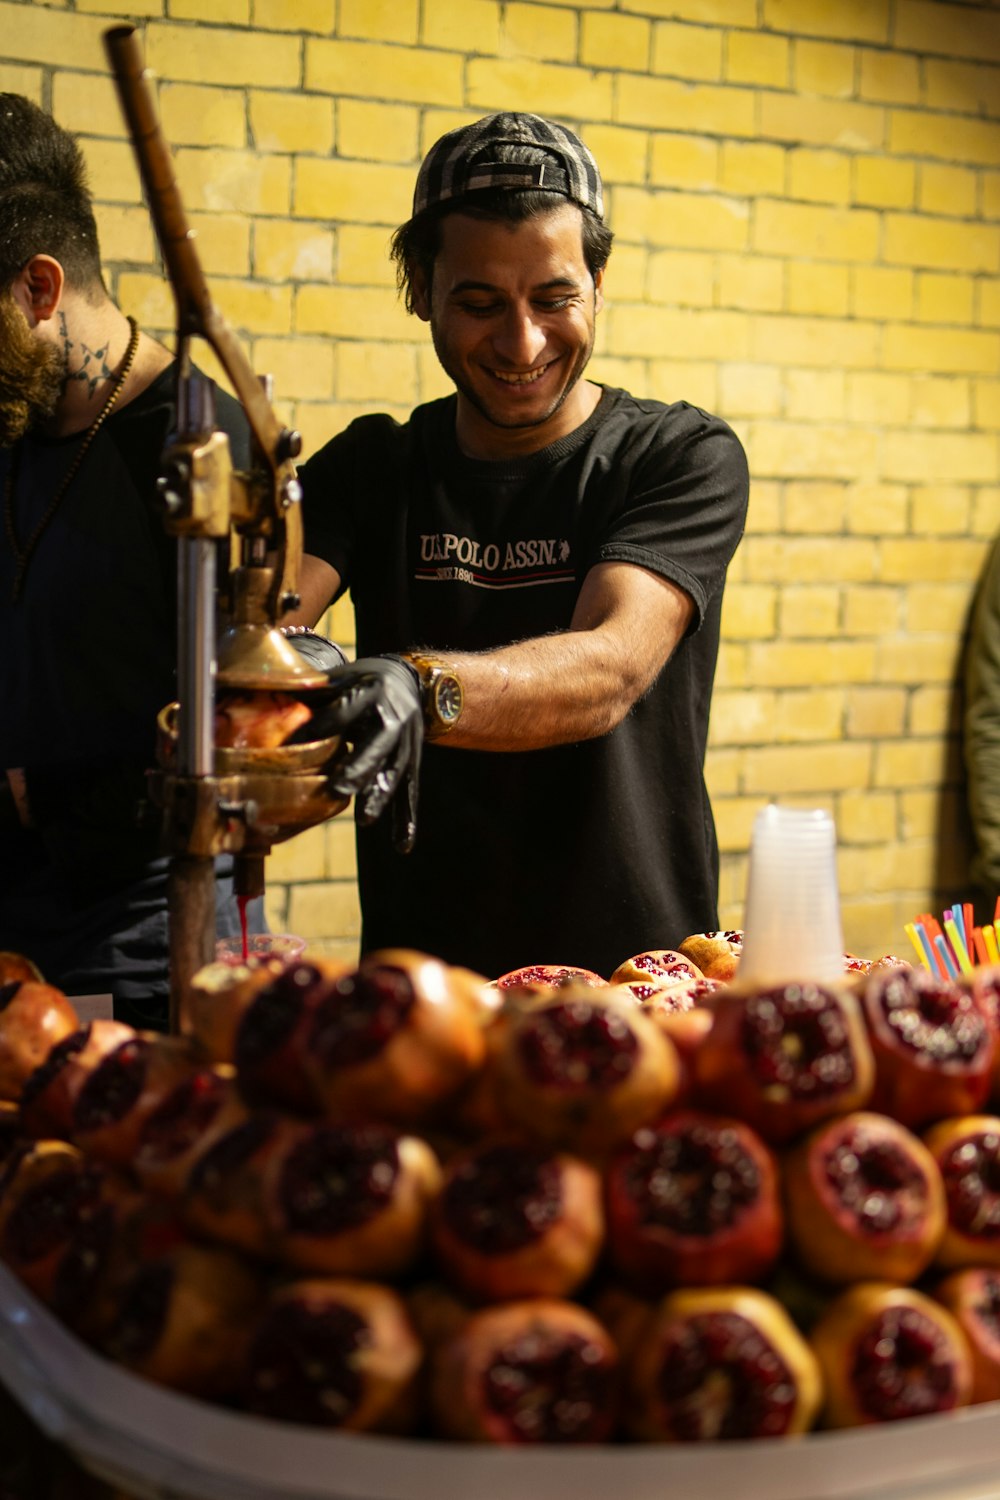 a man working on a machine in front of a pile of doughnuts